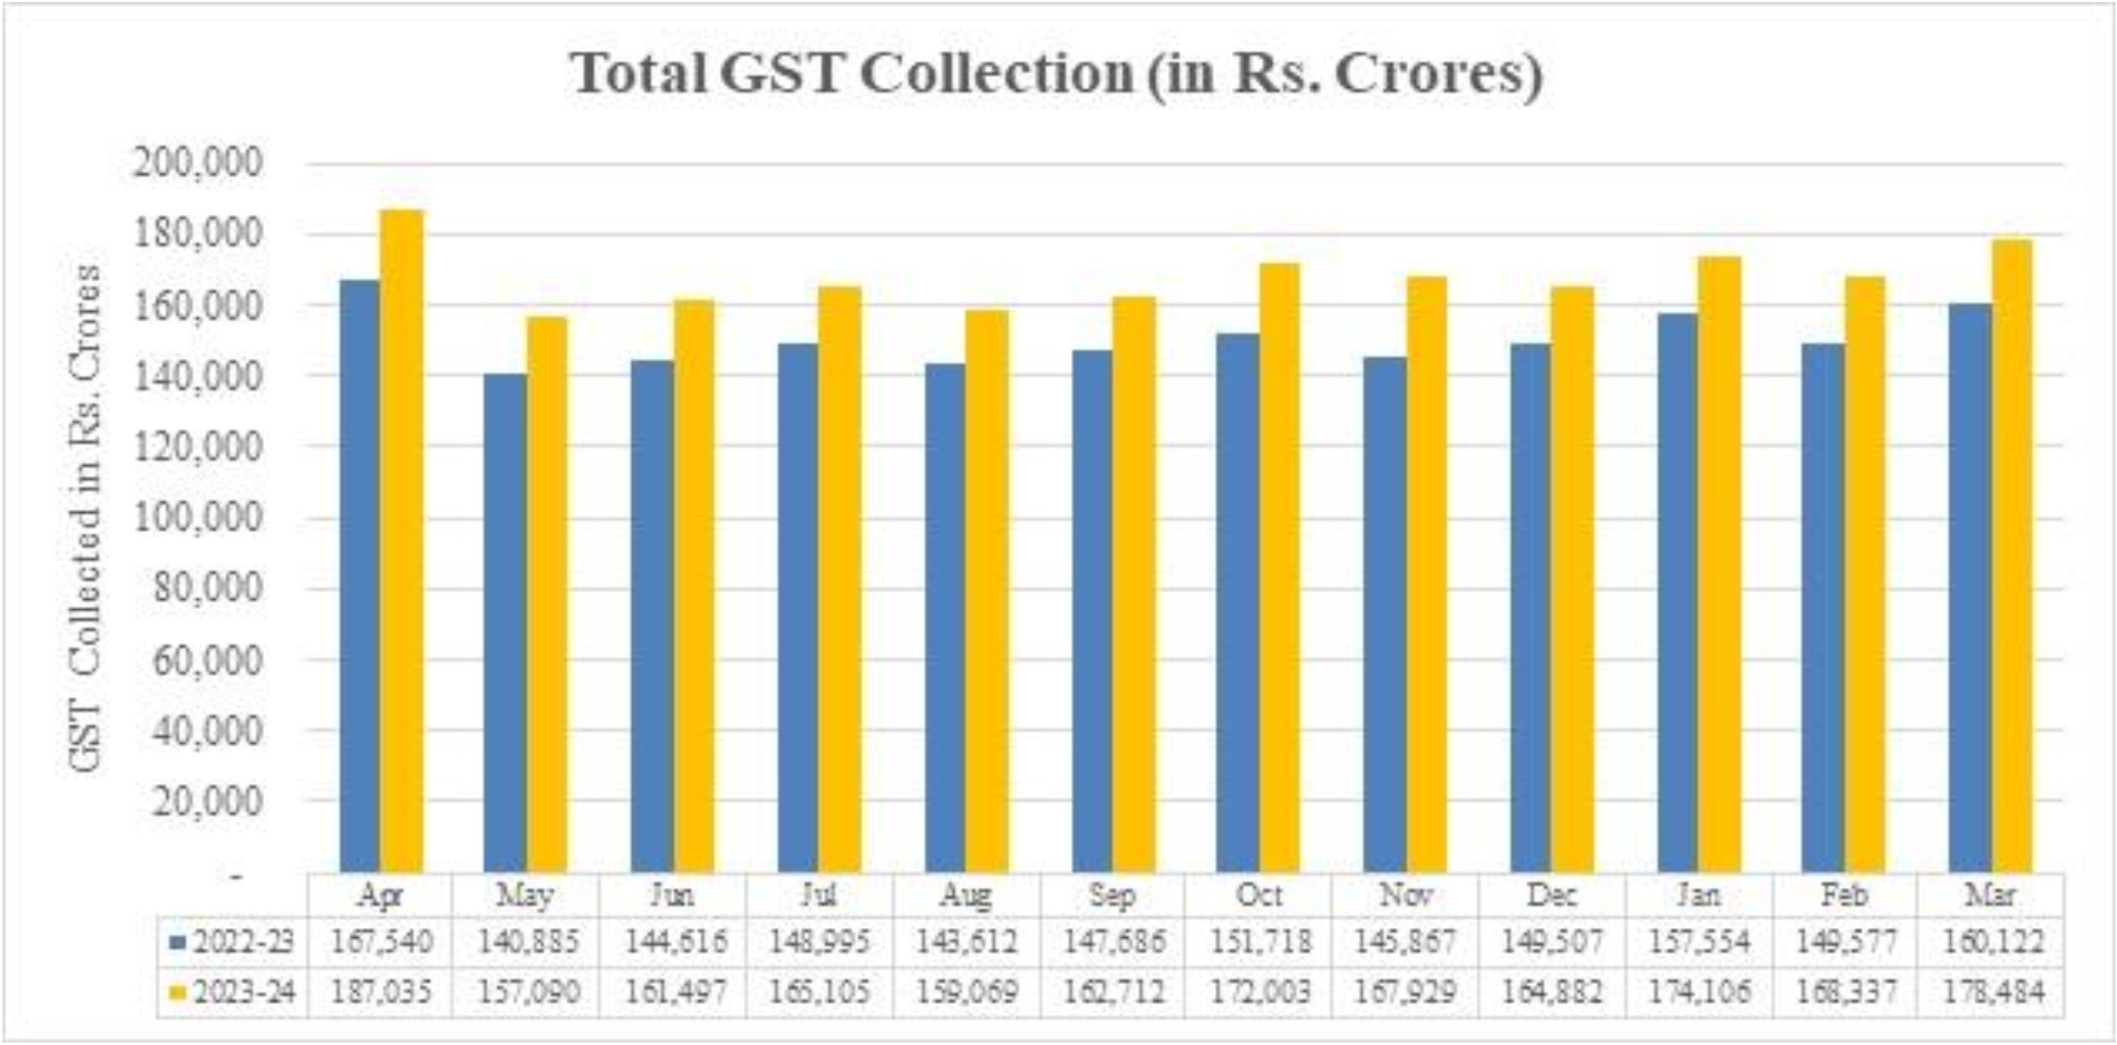 Second highest monthly Gross GST Revenue collection in March